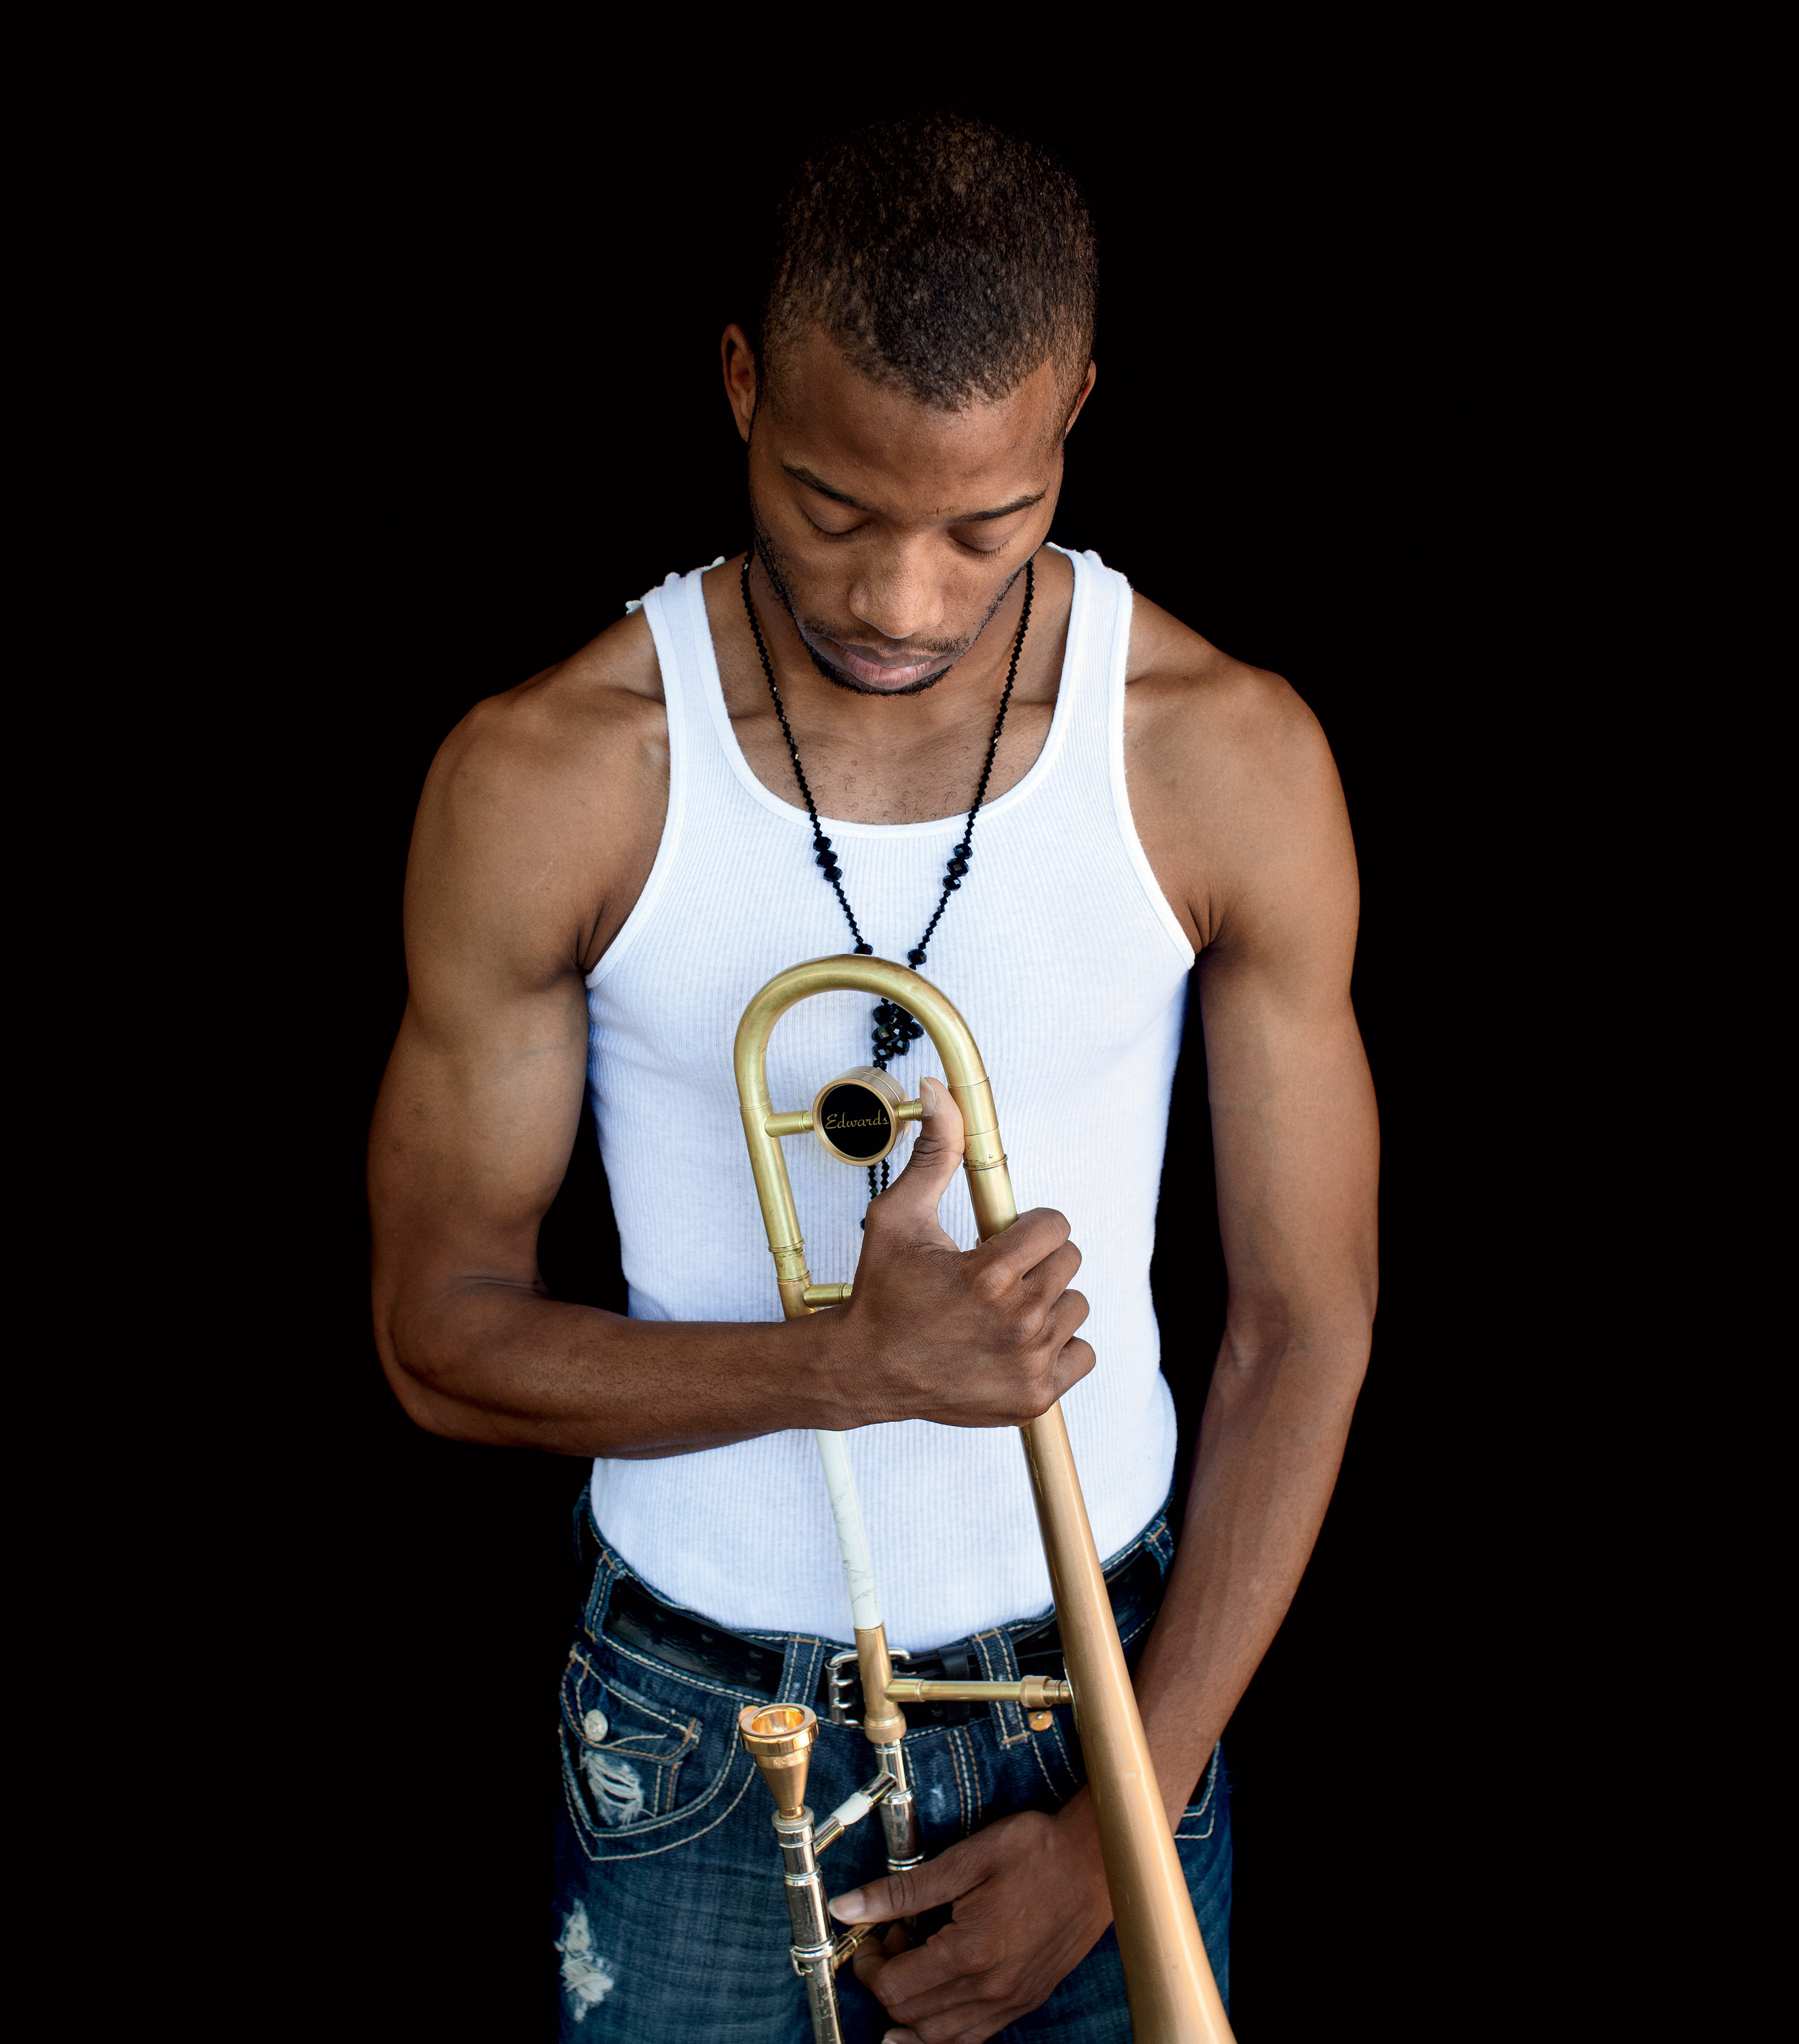 Trombone Shorty on His New Album and the Future of New Orleans